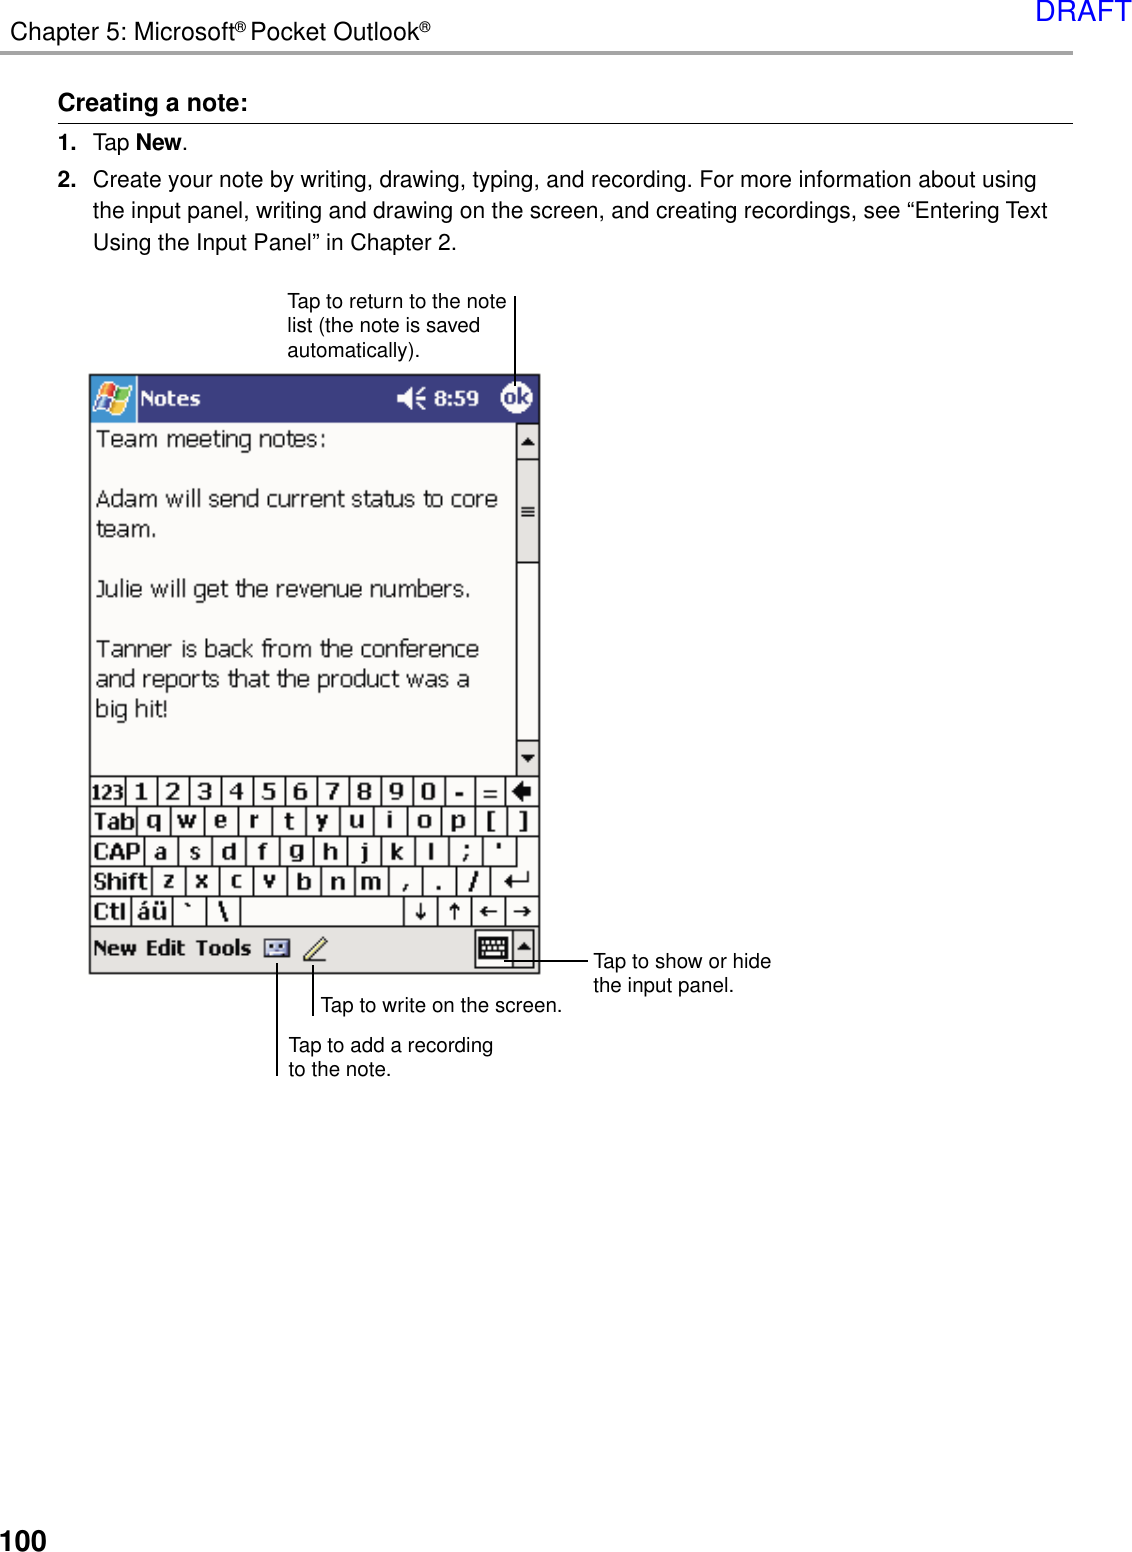 100Chapter 5: Microsoft® Pocket Outlook®Creating a note:1. Tap New.2. Create your note by writing, drawing, typing, and recording. For more information about usingthe input panel, writing and drawing on the screen, and creating recordings, see “Entering TextUsing the Input Panel” in Chapter 2.Tap to add a recordingto the note.Tap to return to the notelist (the note is savedautomatically).Tap to show or hidethe input panel.Tap to write on the screen.DRAFT